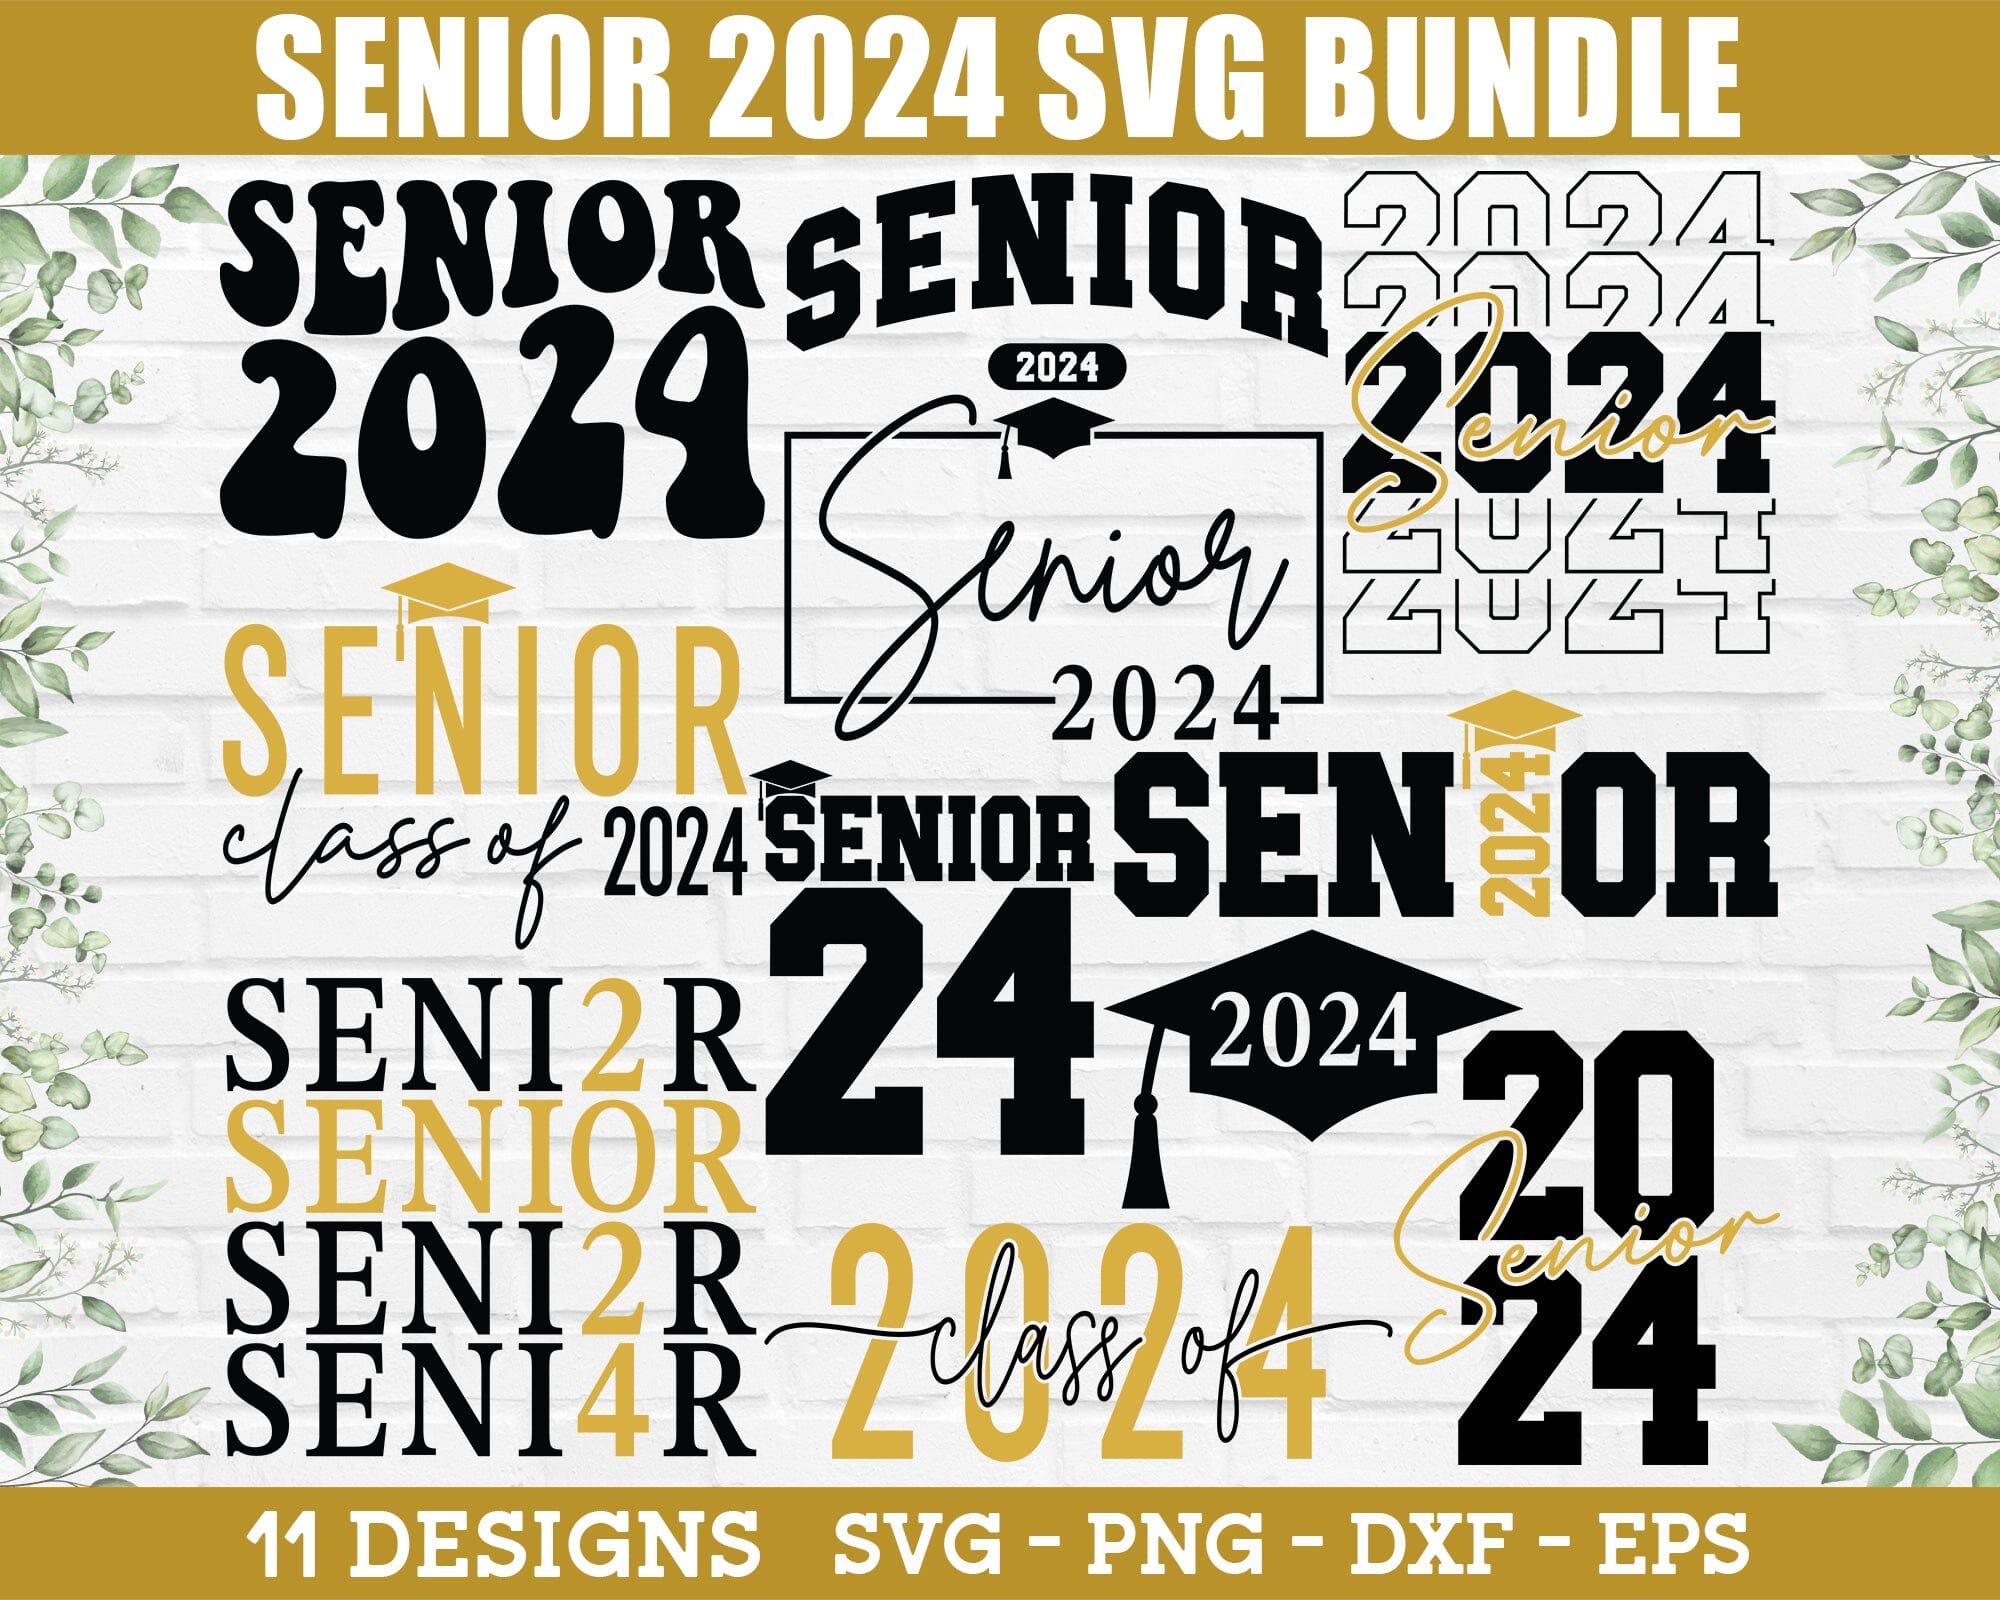 Class of 2024 SVG, class of 2024, Seniors 2024 SVG png, Graduation class of  2024 svg png, first day of school, jersey font, Back to School